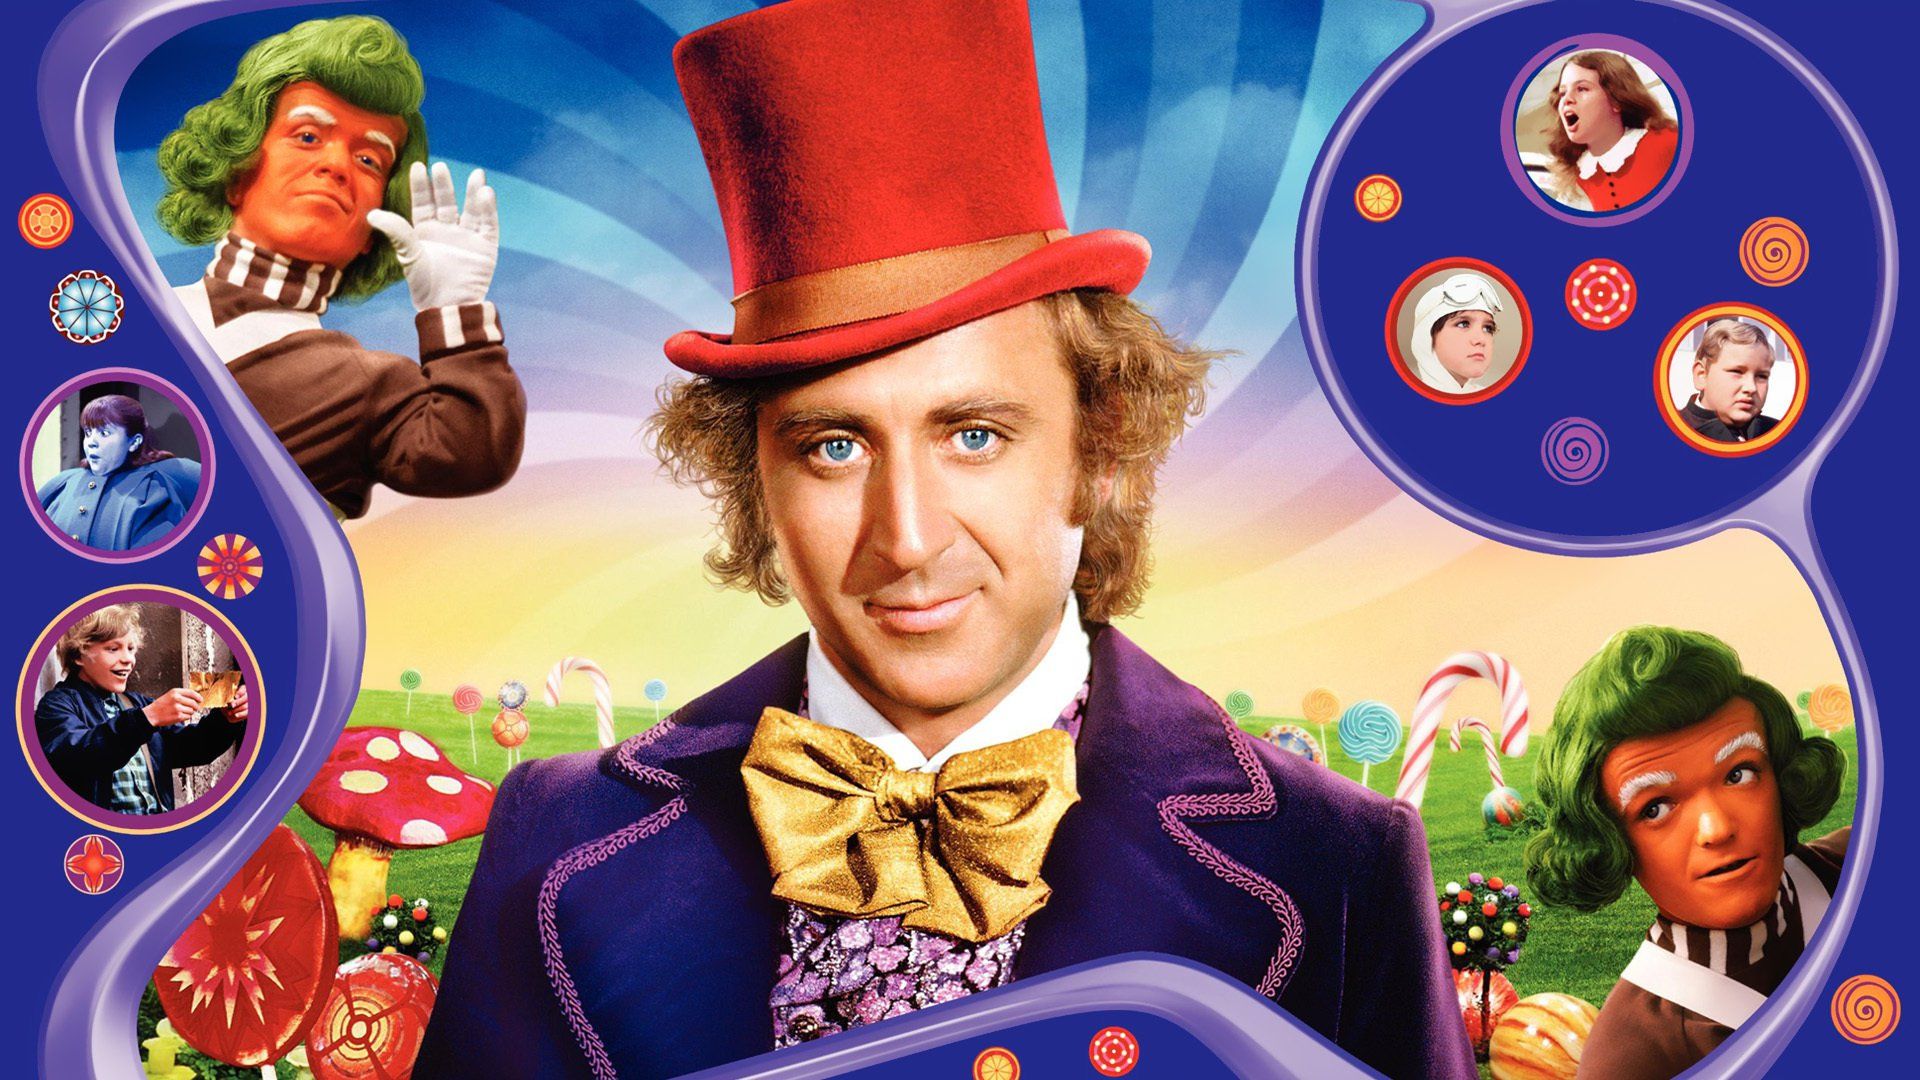 Pure Imagination: The Story of 'Willy Wonka and the Chocolate Factory' Backdrop